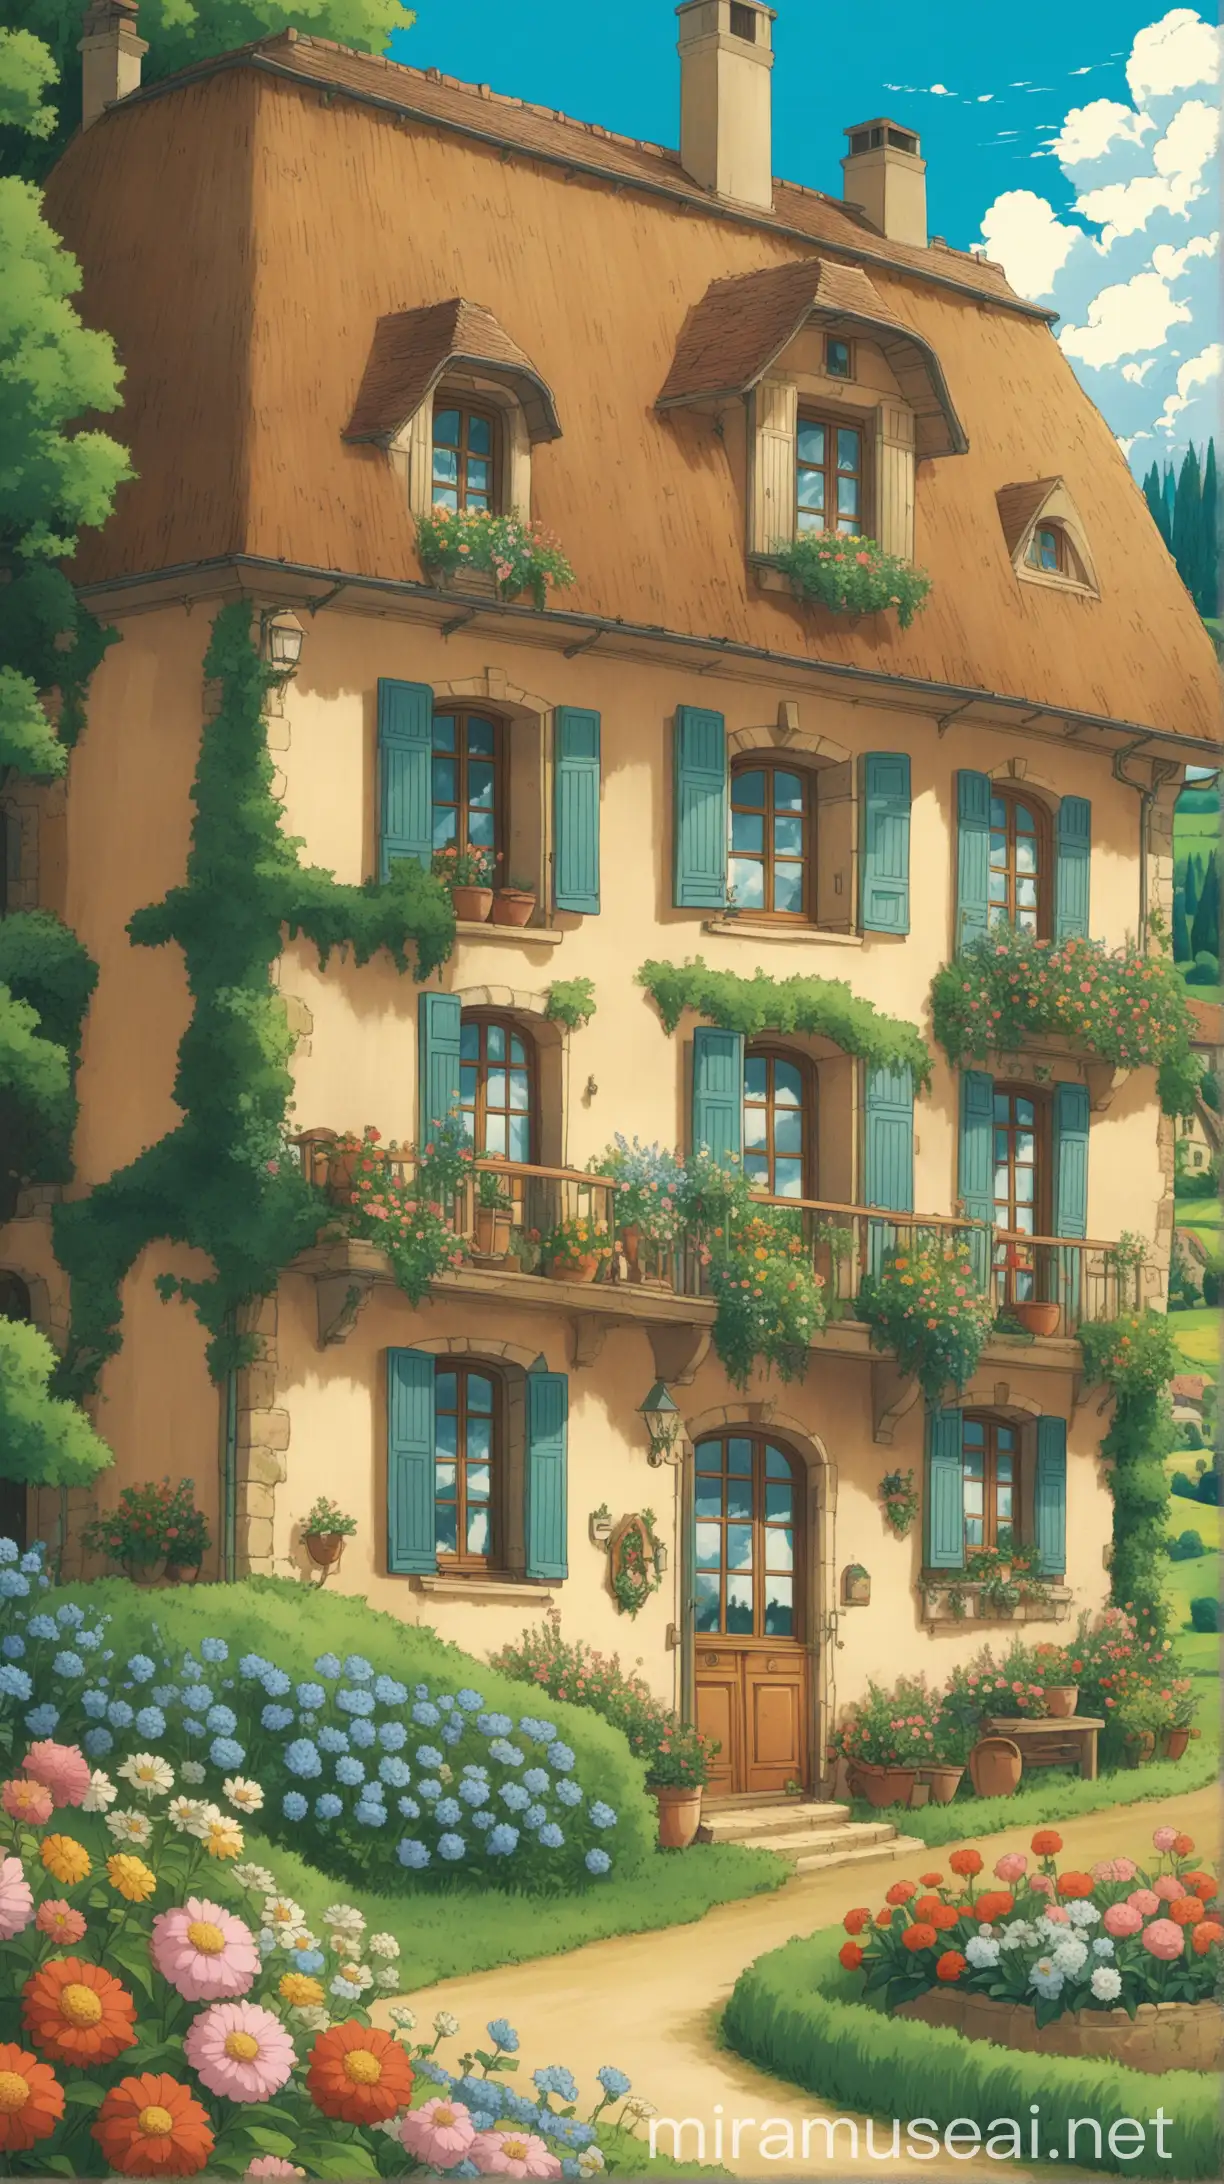 Cozy French Countryside Scene GhibliInspired Cottage Amidst Lush Flowers